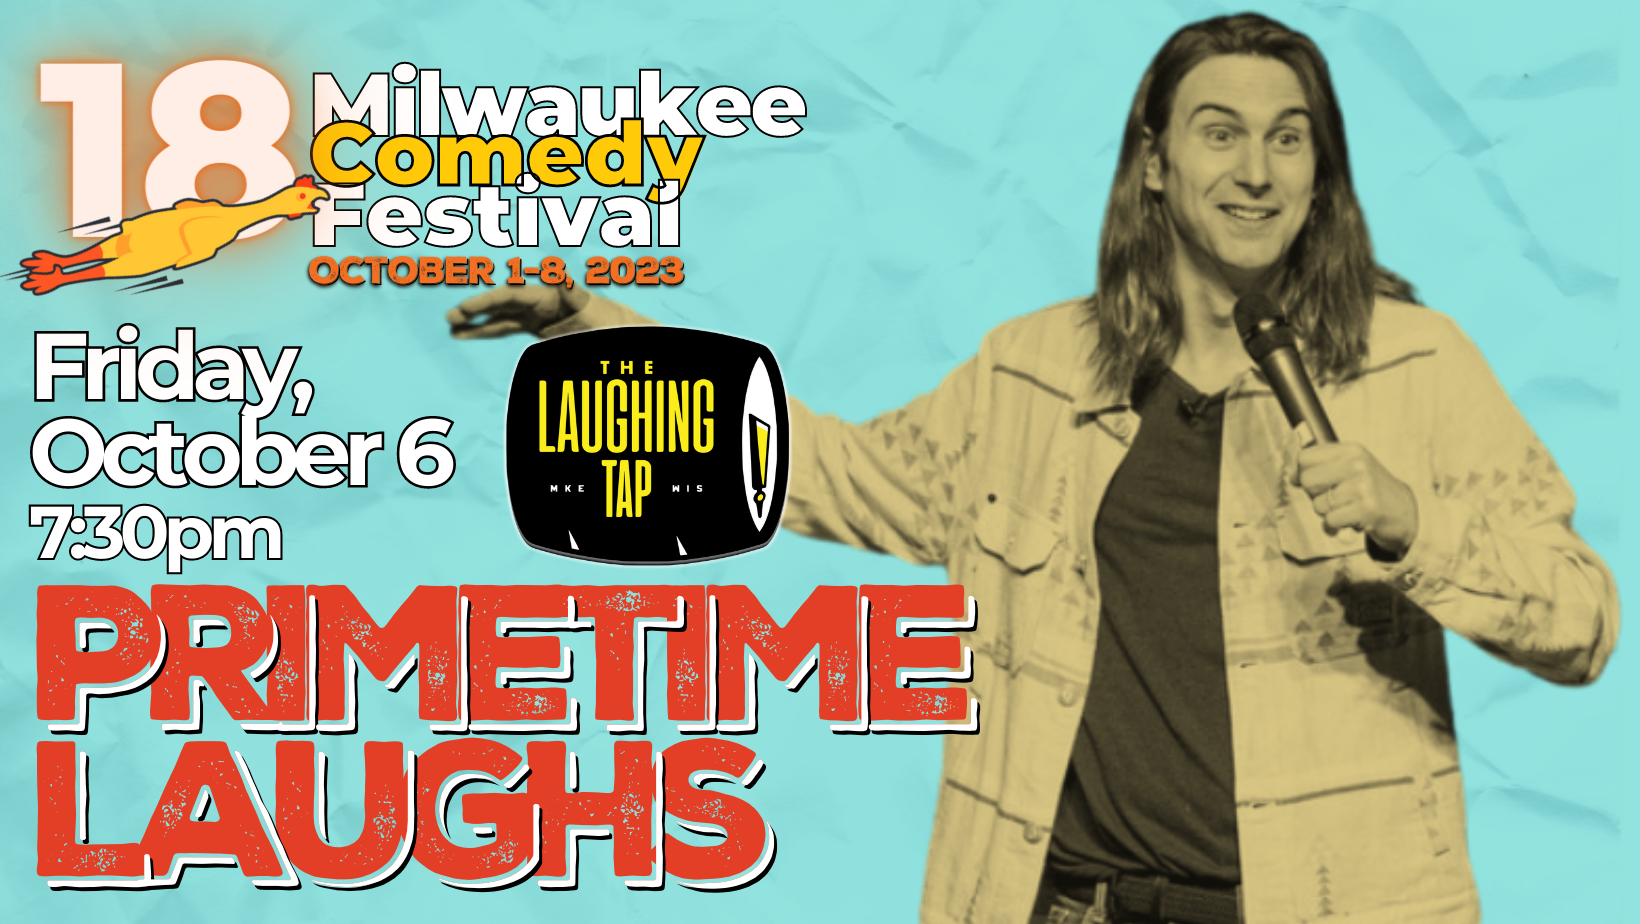 Prime Time Laughs Oct 6 at 7:30pm